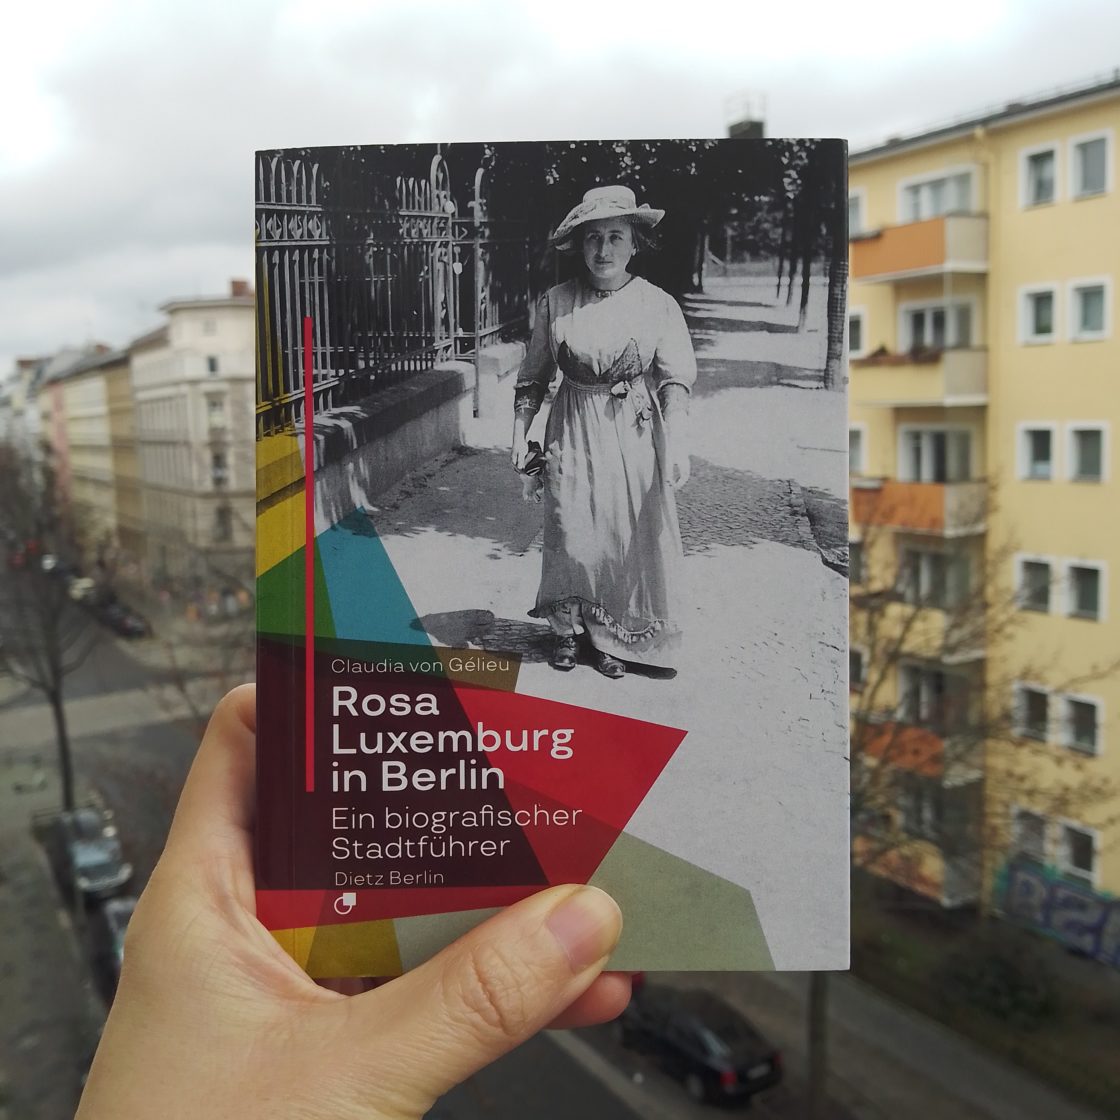 book, Rosa Luxemburg in Berlin hold with a left hand, in front of pale yellow building with many windows. On the cover, Rosa Luxemburg in summer dress and hat walking on a street